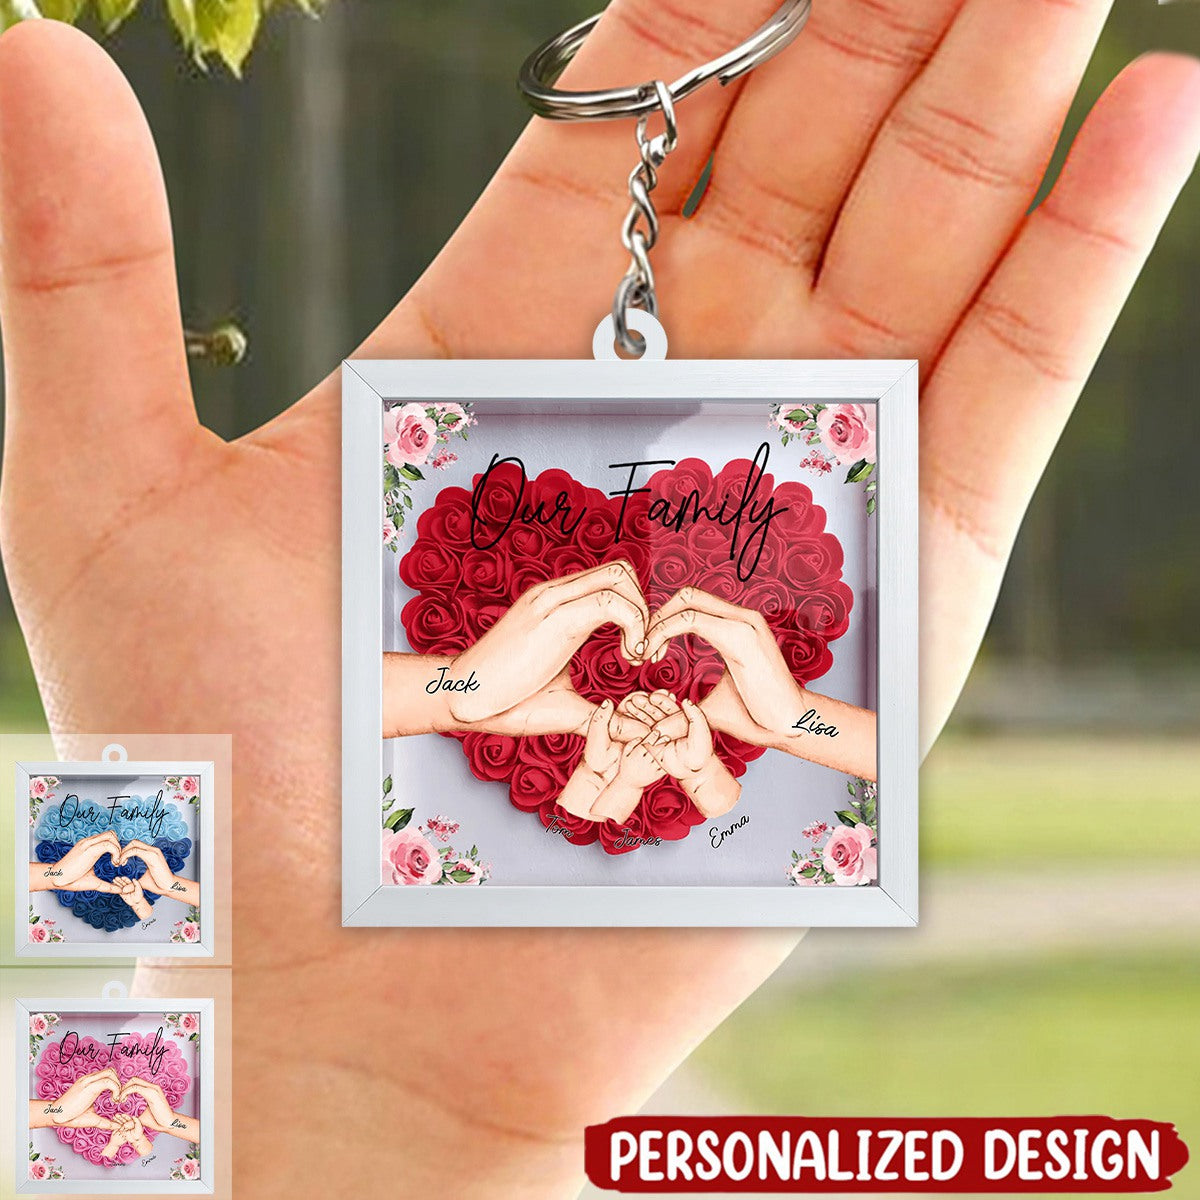 Our Family Holding Hands Heart-Shaped Flowers Frame Effect Acrylic Keychain